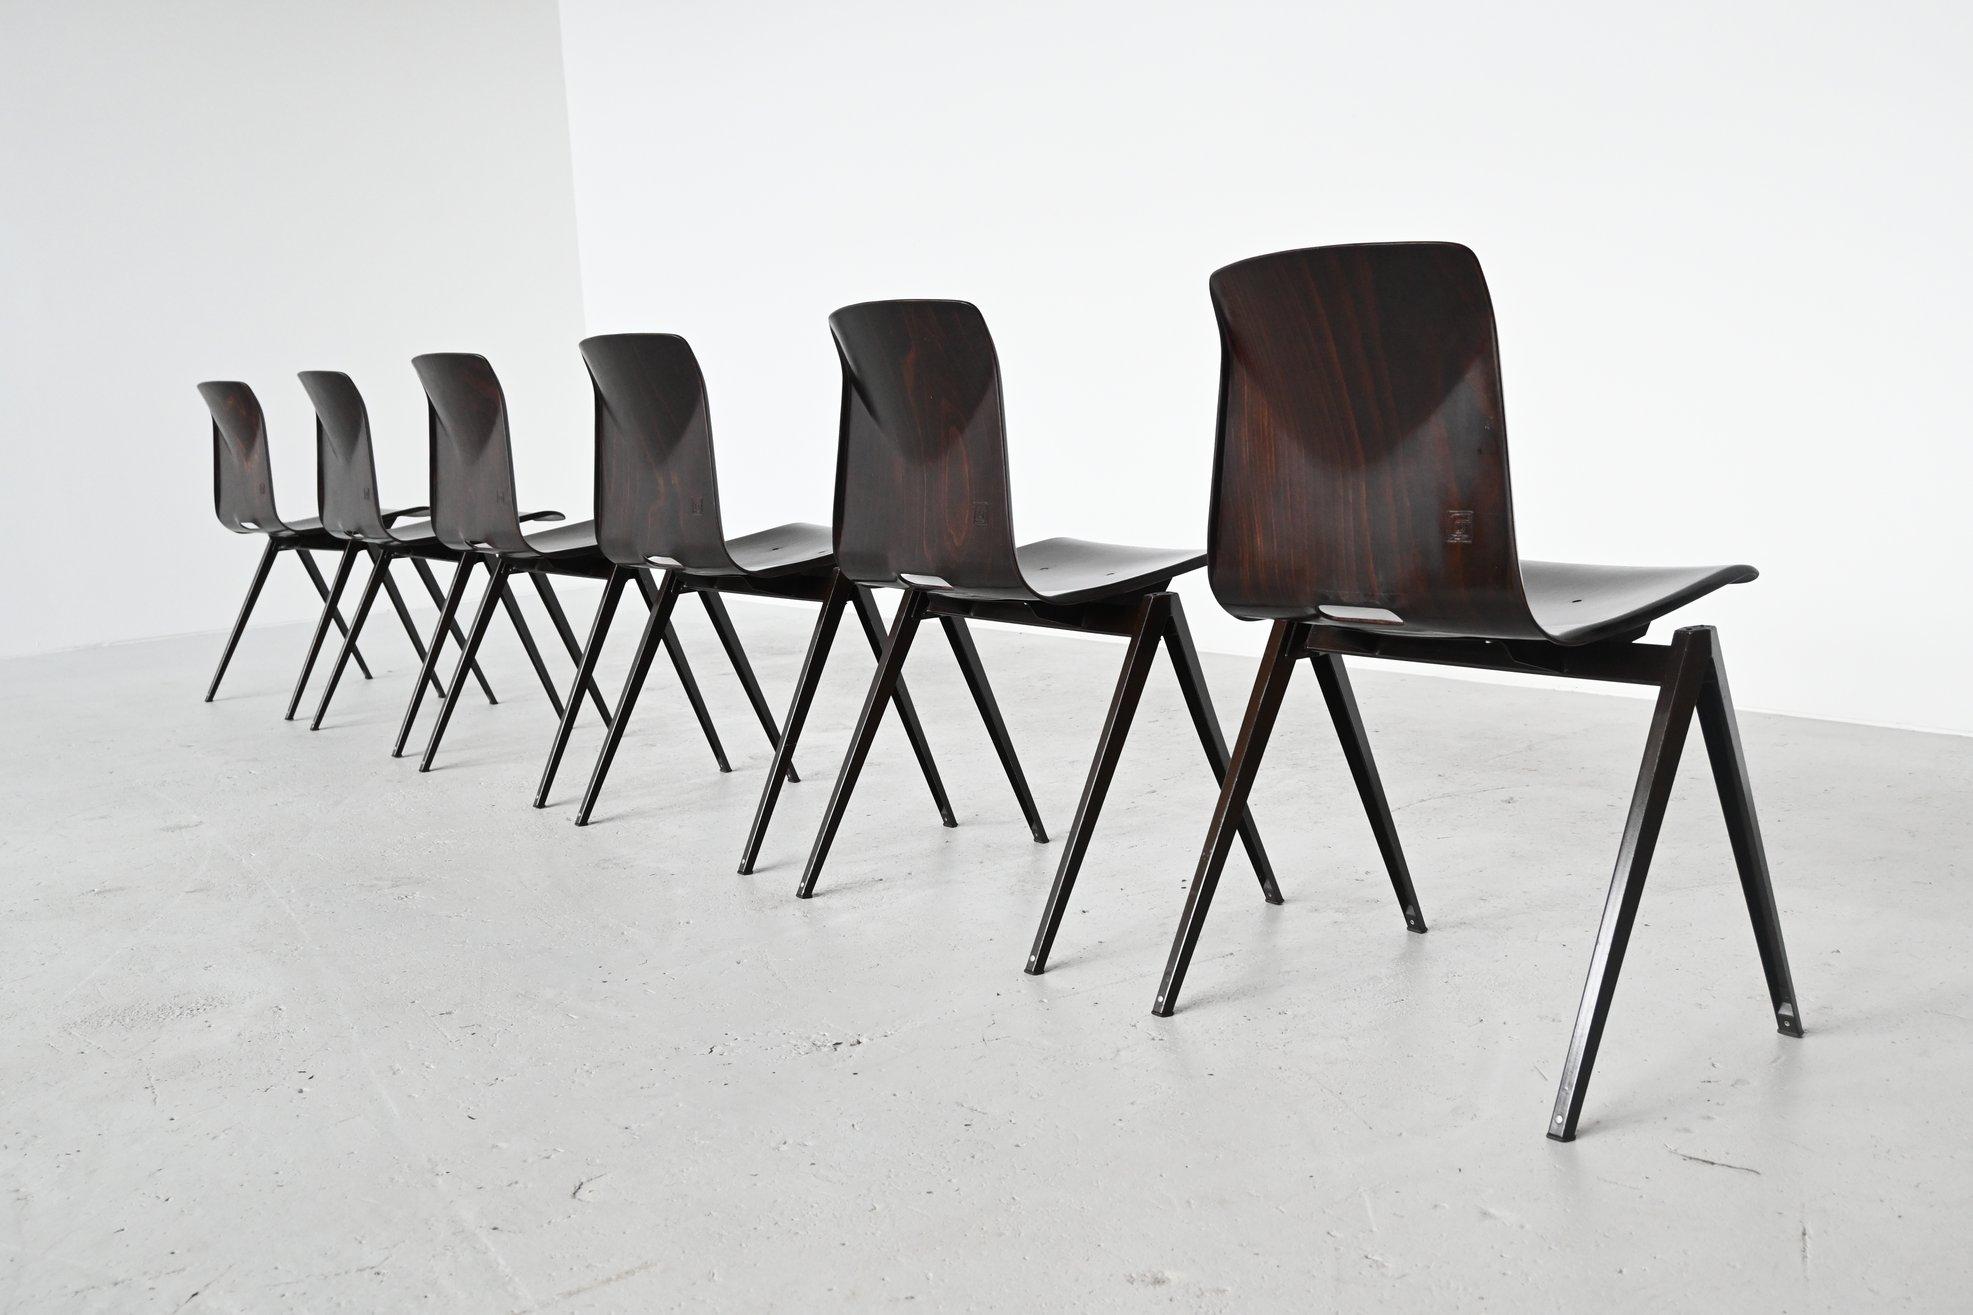 Large lot of 30 stacking chairs model S22 designed by Elmar Flototto and manufactured by Pagholz, Germany, 1970. These chairs have dark brown V-shaped metal frames and dark brown pressed wood seats. They have a nice patina from several years of